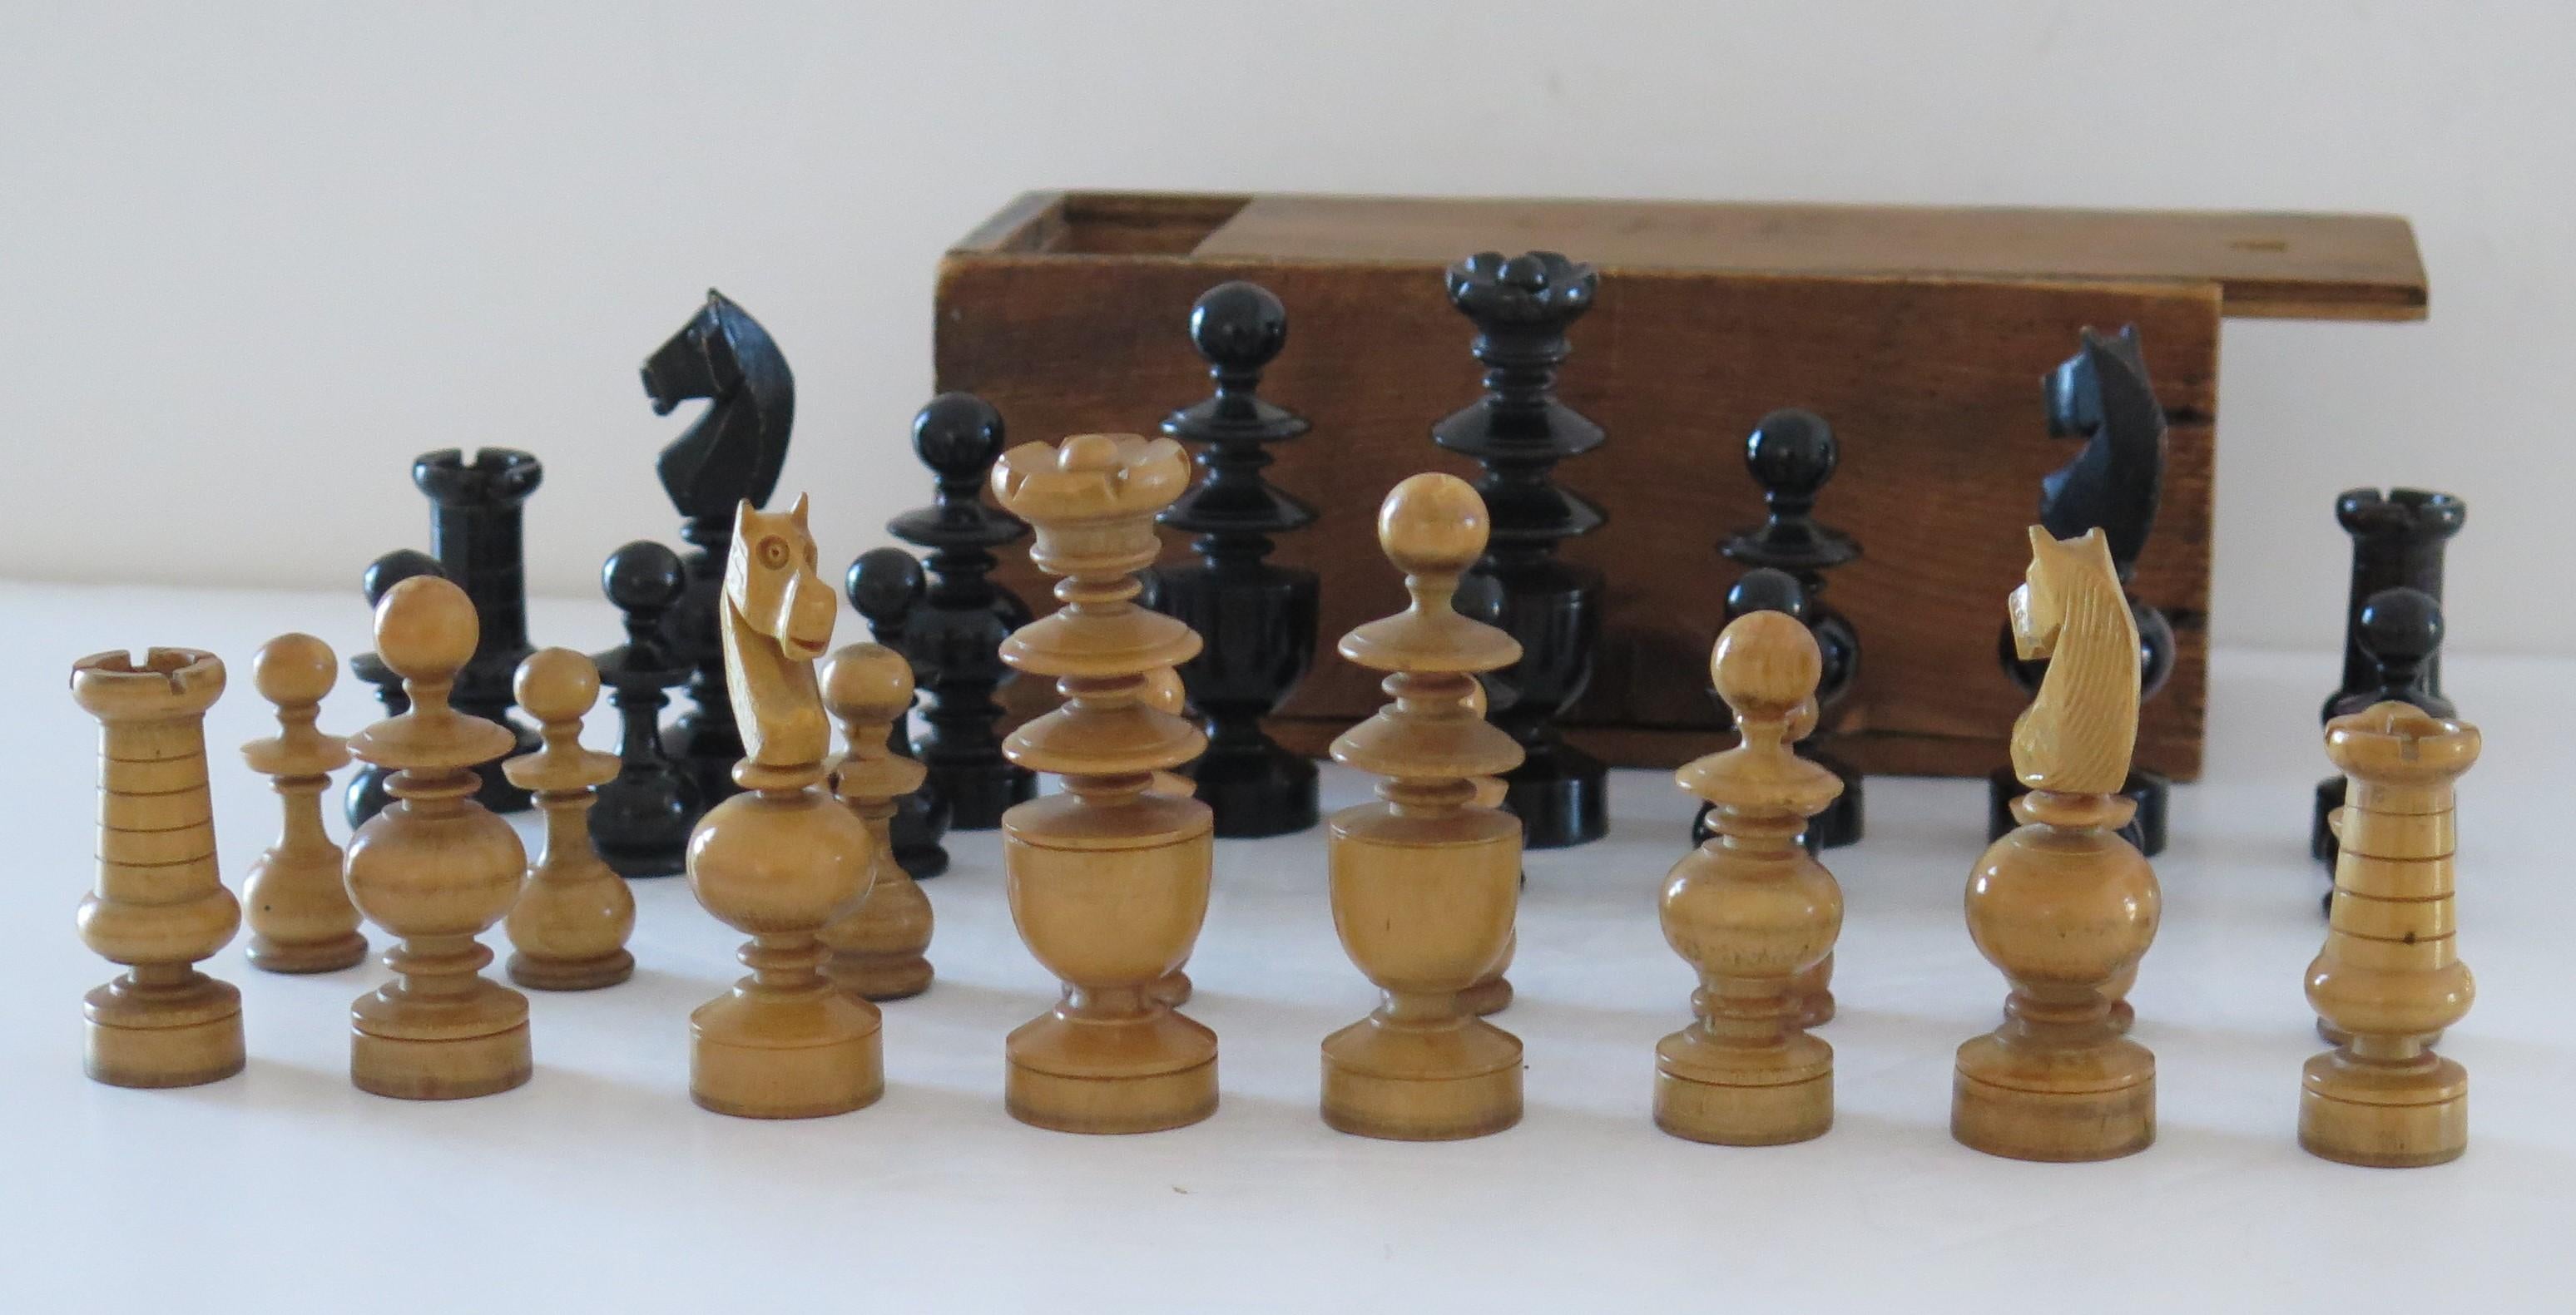 This is a very good and complete handmade, hardwood chess set game of 32 pieces in a handmade pine box with a sliding lid, which we date to the turn of the 19th Century, Circa 1900.

The chess set is complete with 32 handmade and turned hardwood